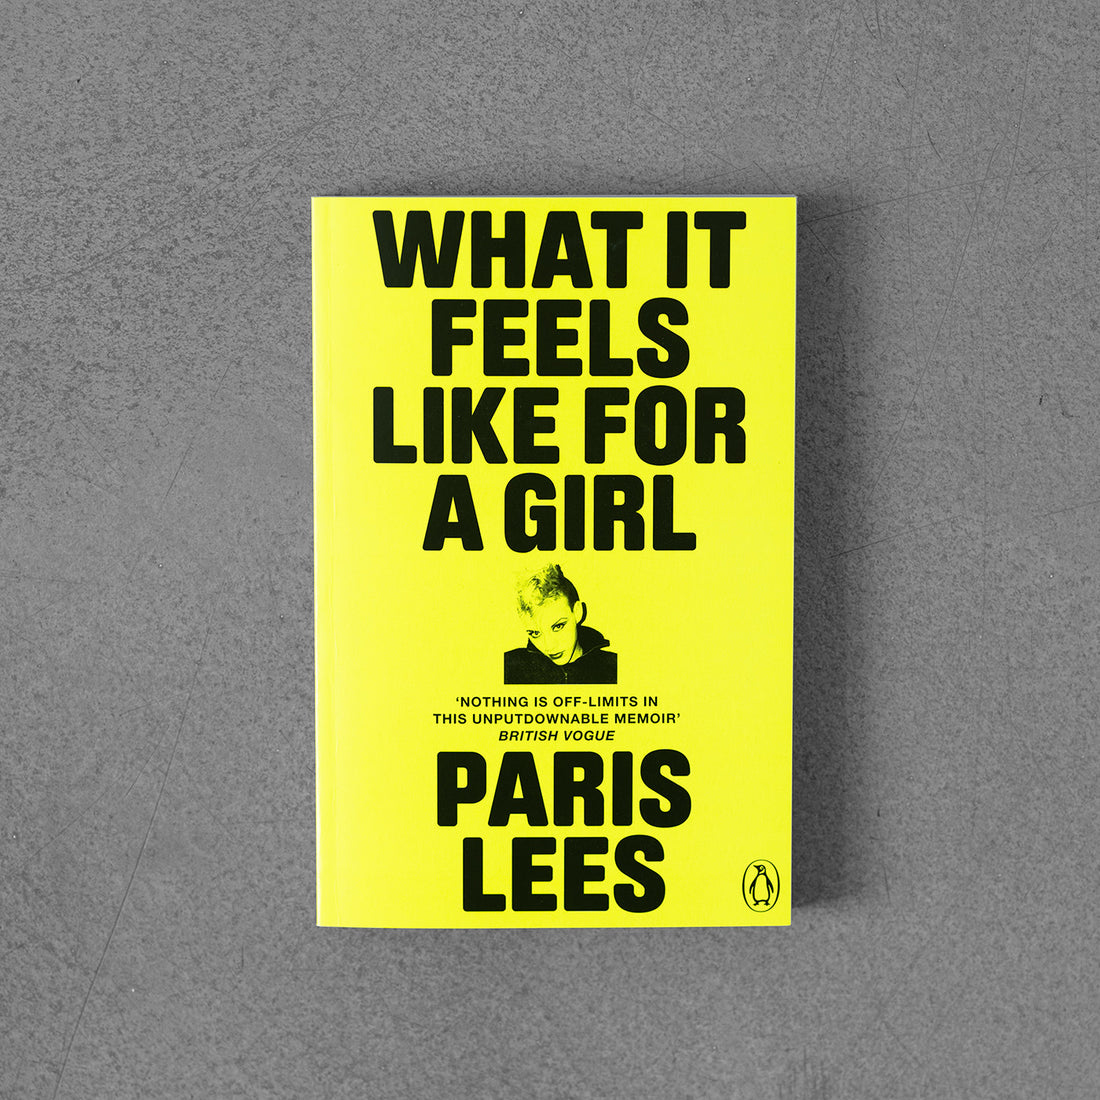 What It Feels Like for a Girl - Paris Lees